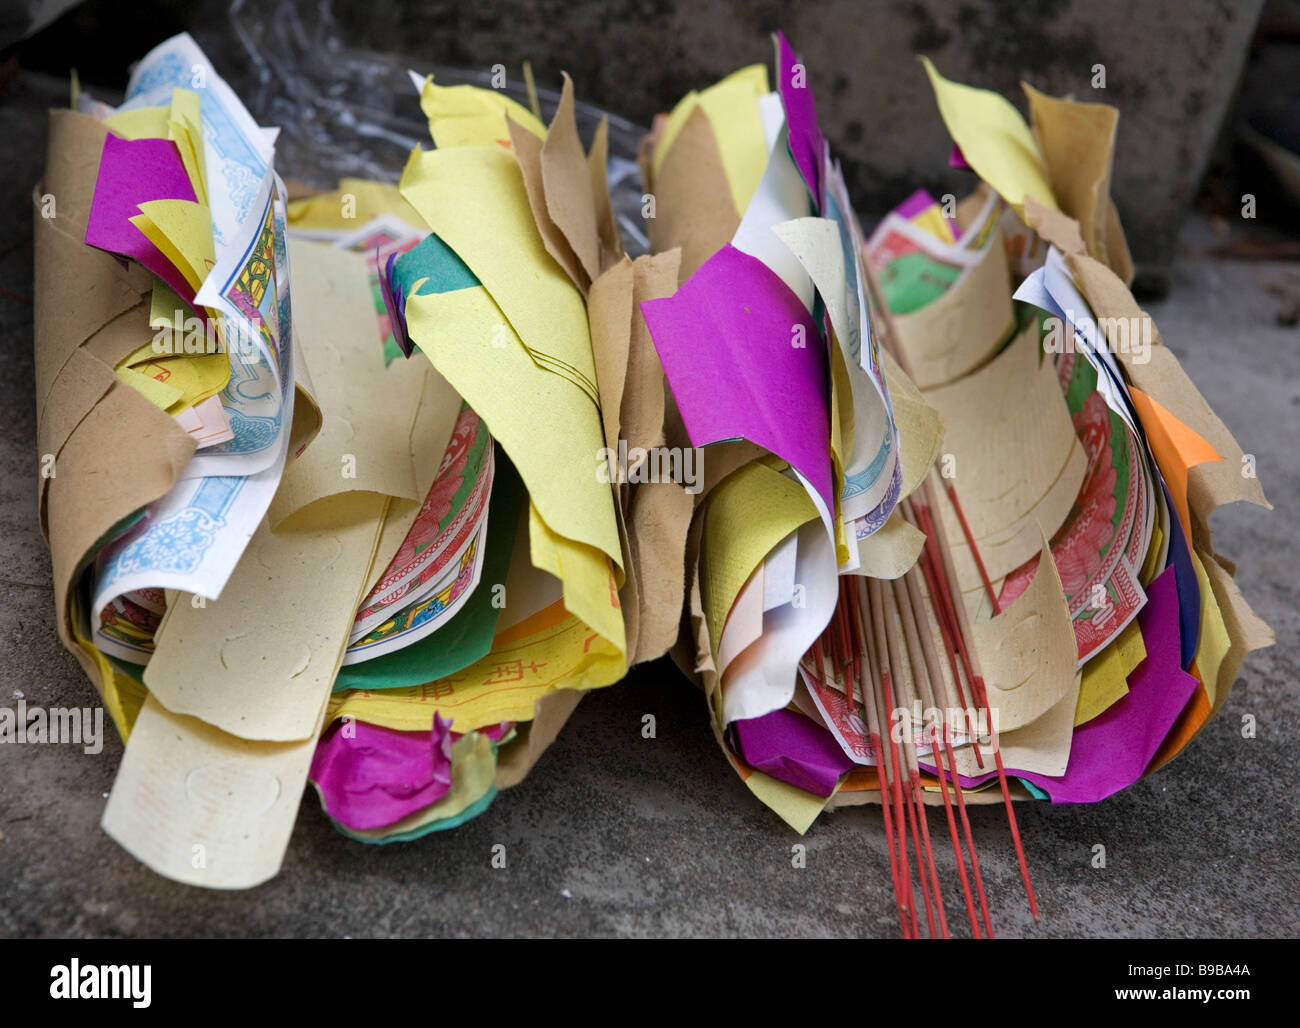 Hell notes to be burned during Qing Ming festival Stock Photo